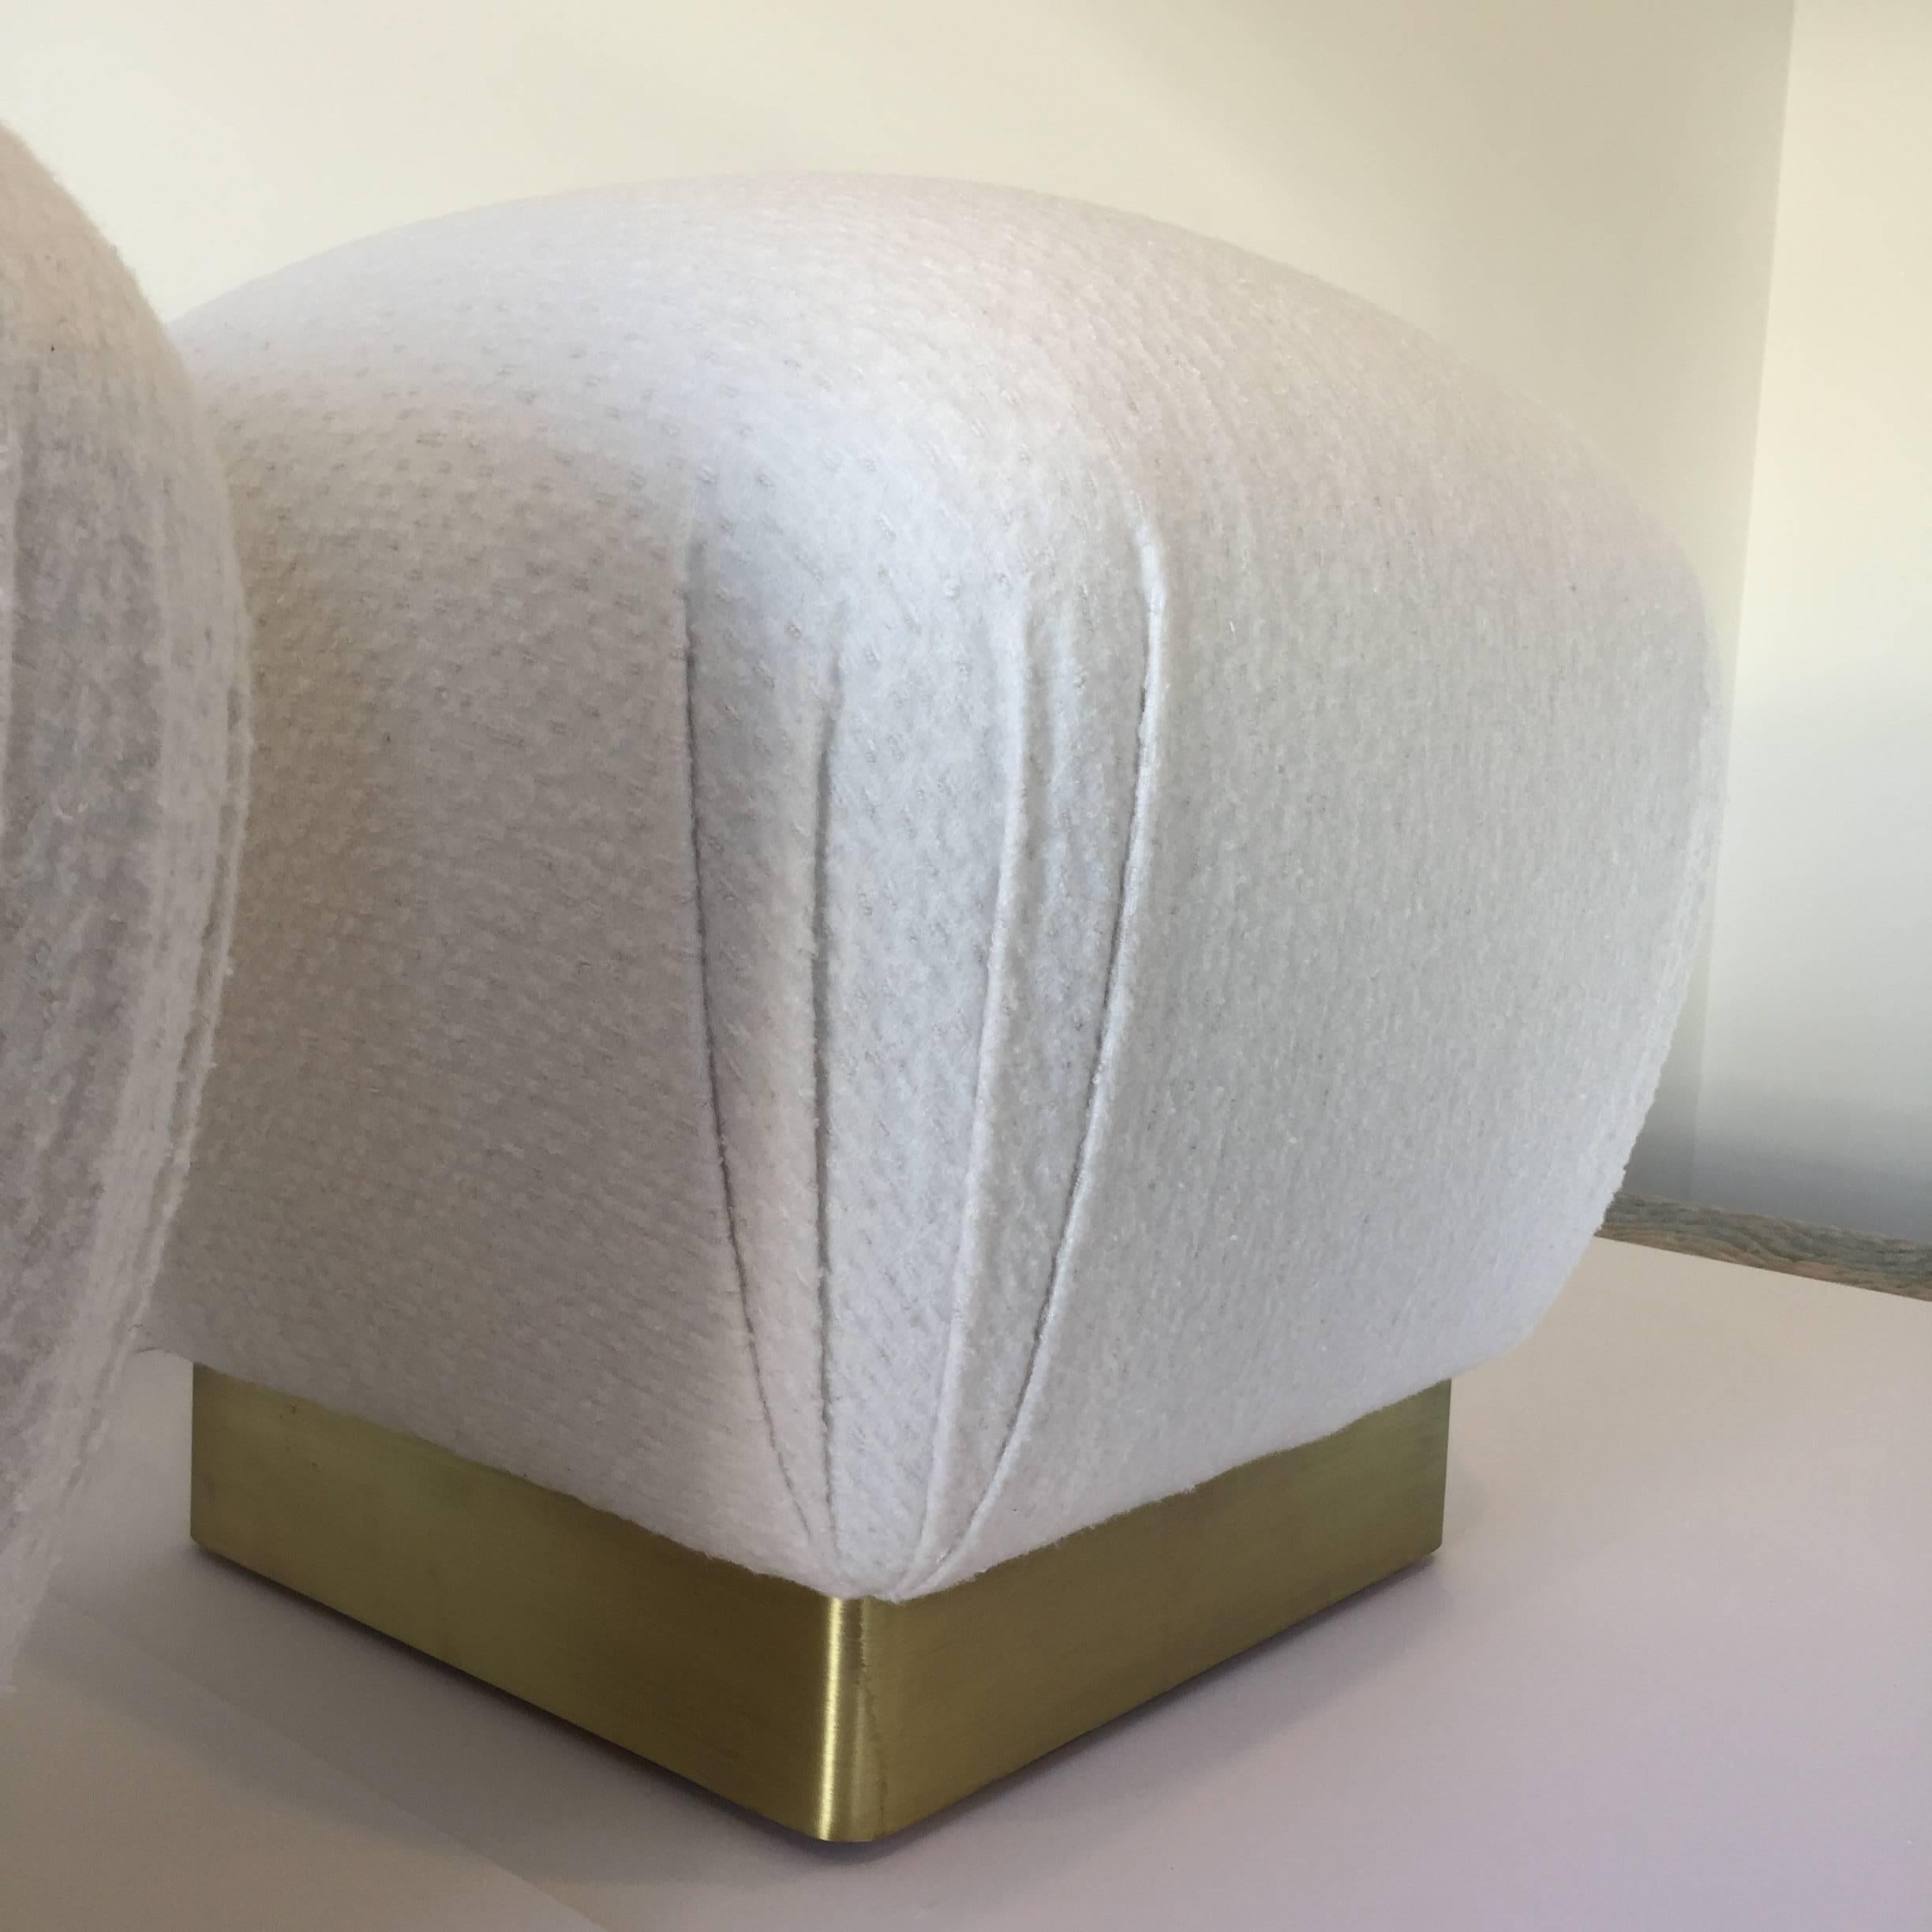 A custom pair of Karl Springer Style Souffle pouf ottomans upholstered in a Sunbrella ivory bouclé fabric with brass bases.